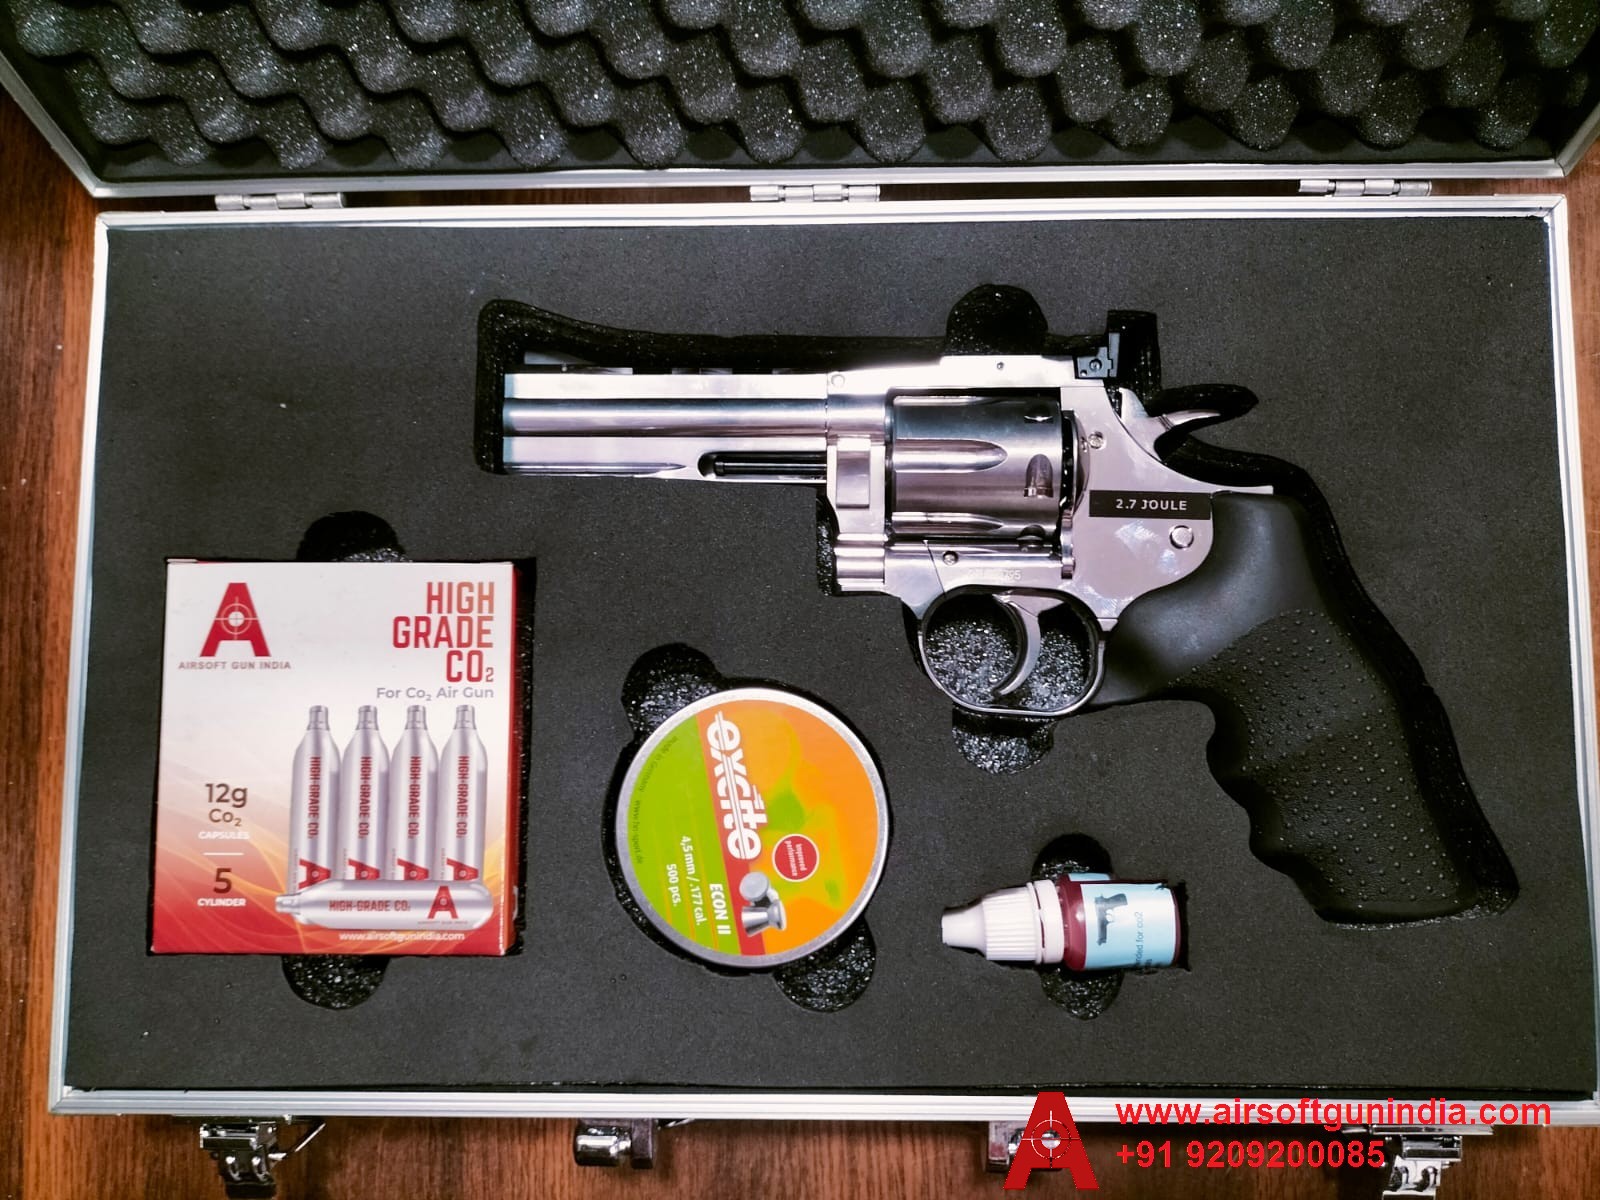 Customized Gun Case For Dan Wesson 715 4 Inch Co2 Pellet Revolver By Airsoft Gun India